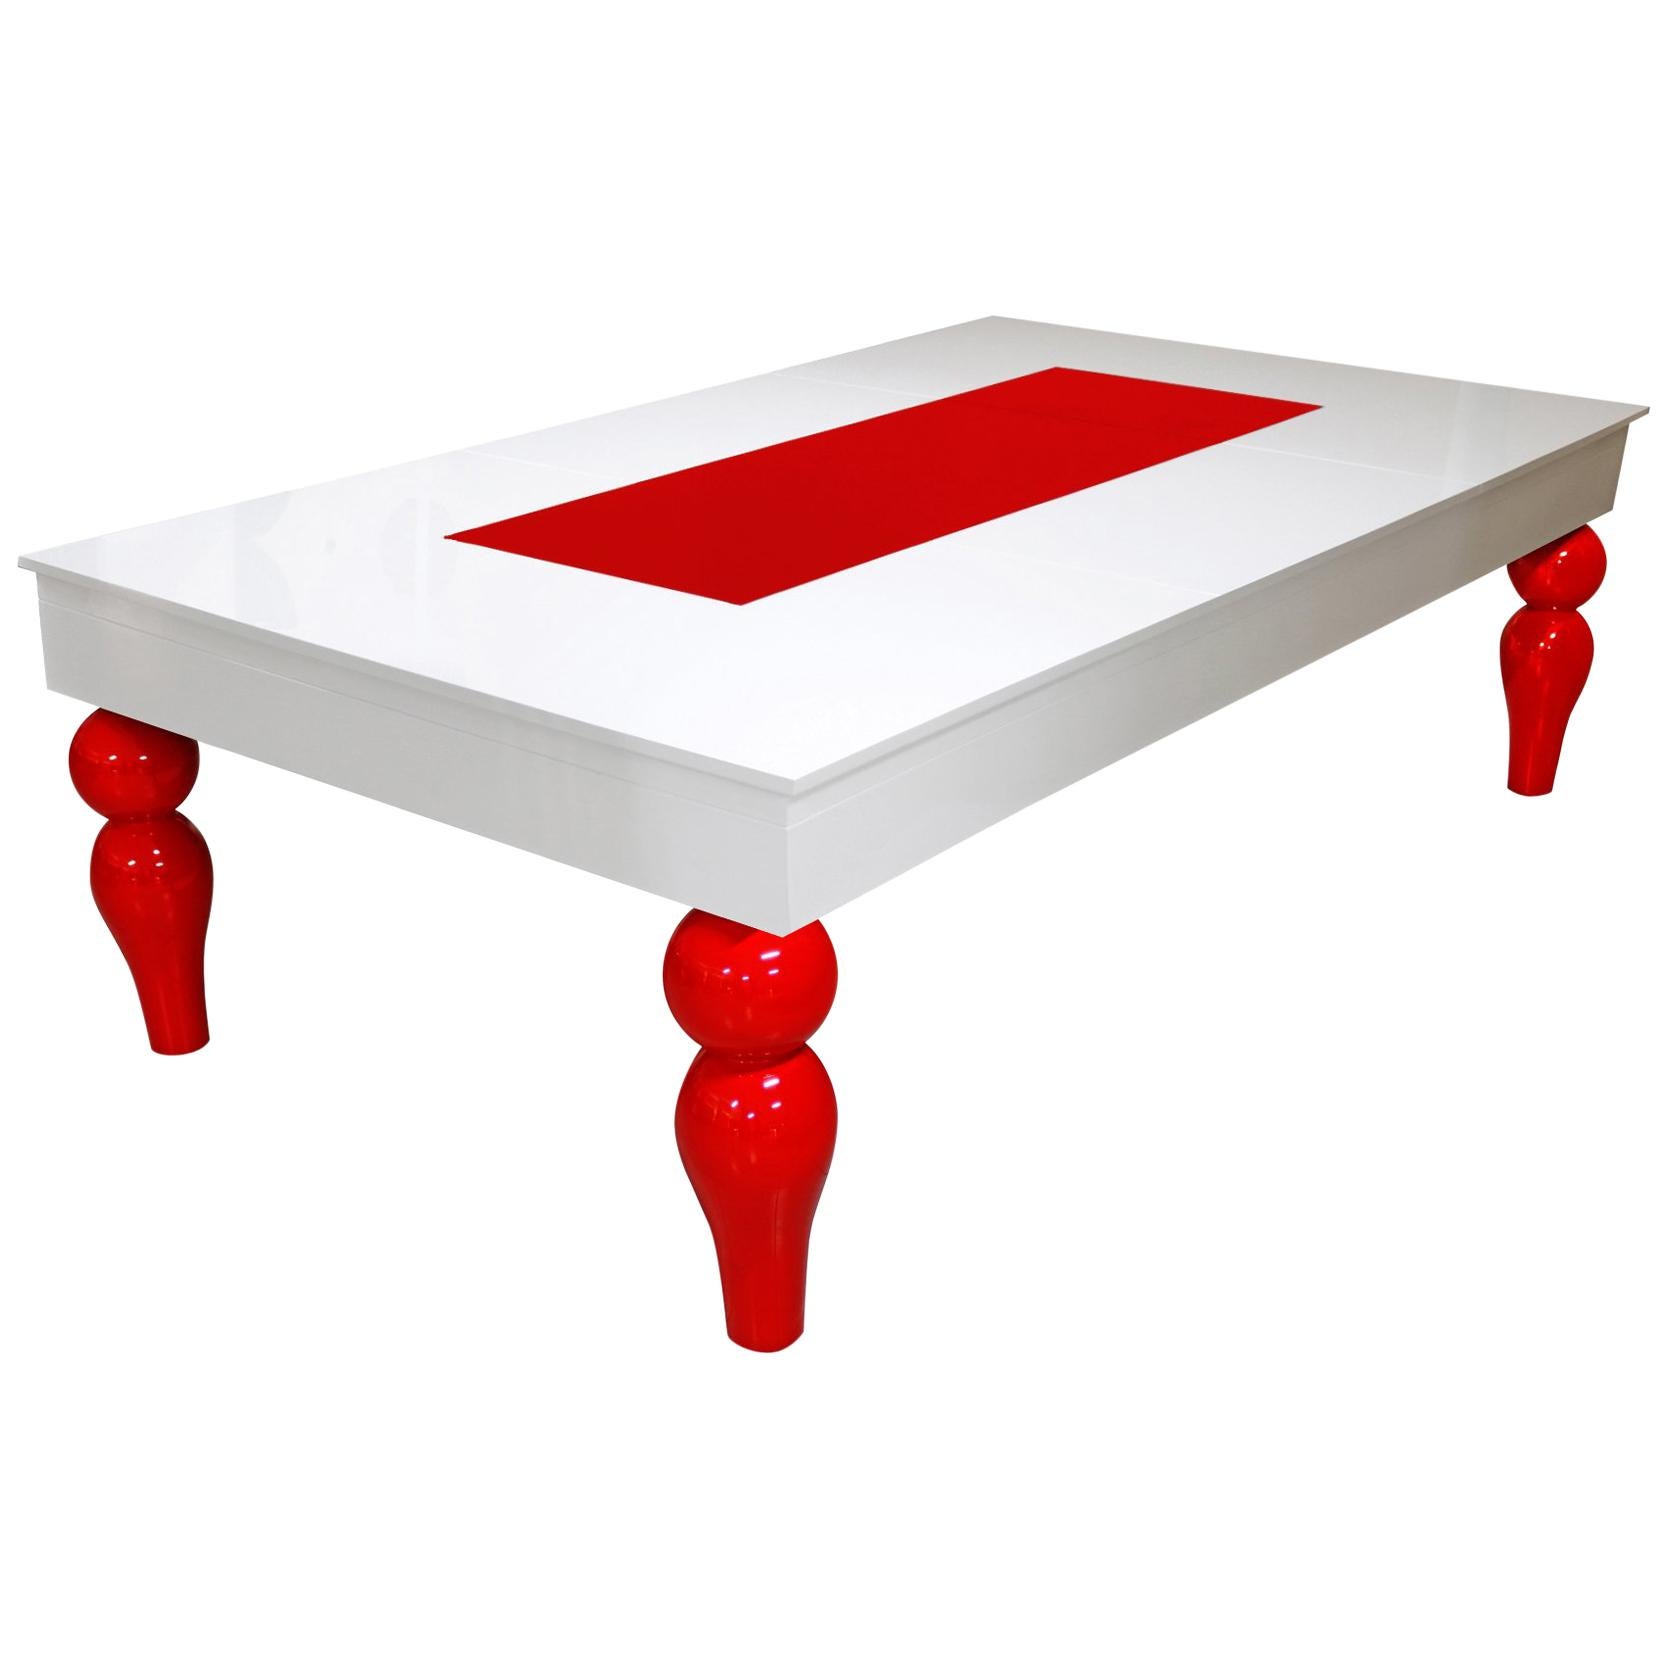 Modern Design Dining Table Billiard Snooker Pool Ping-Pong Table in White & Red